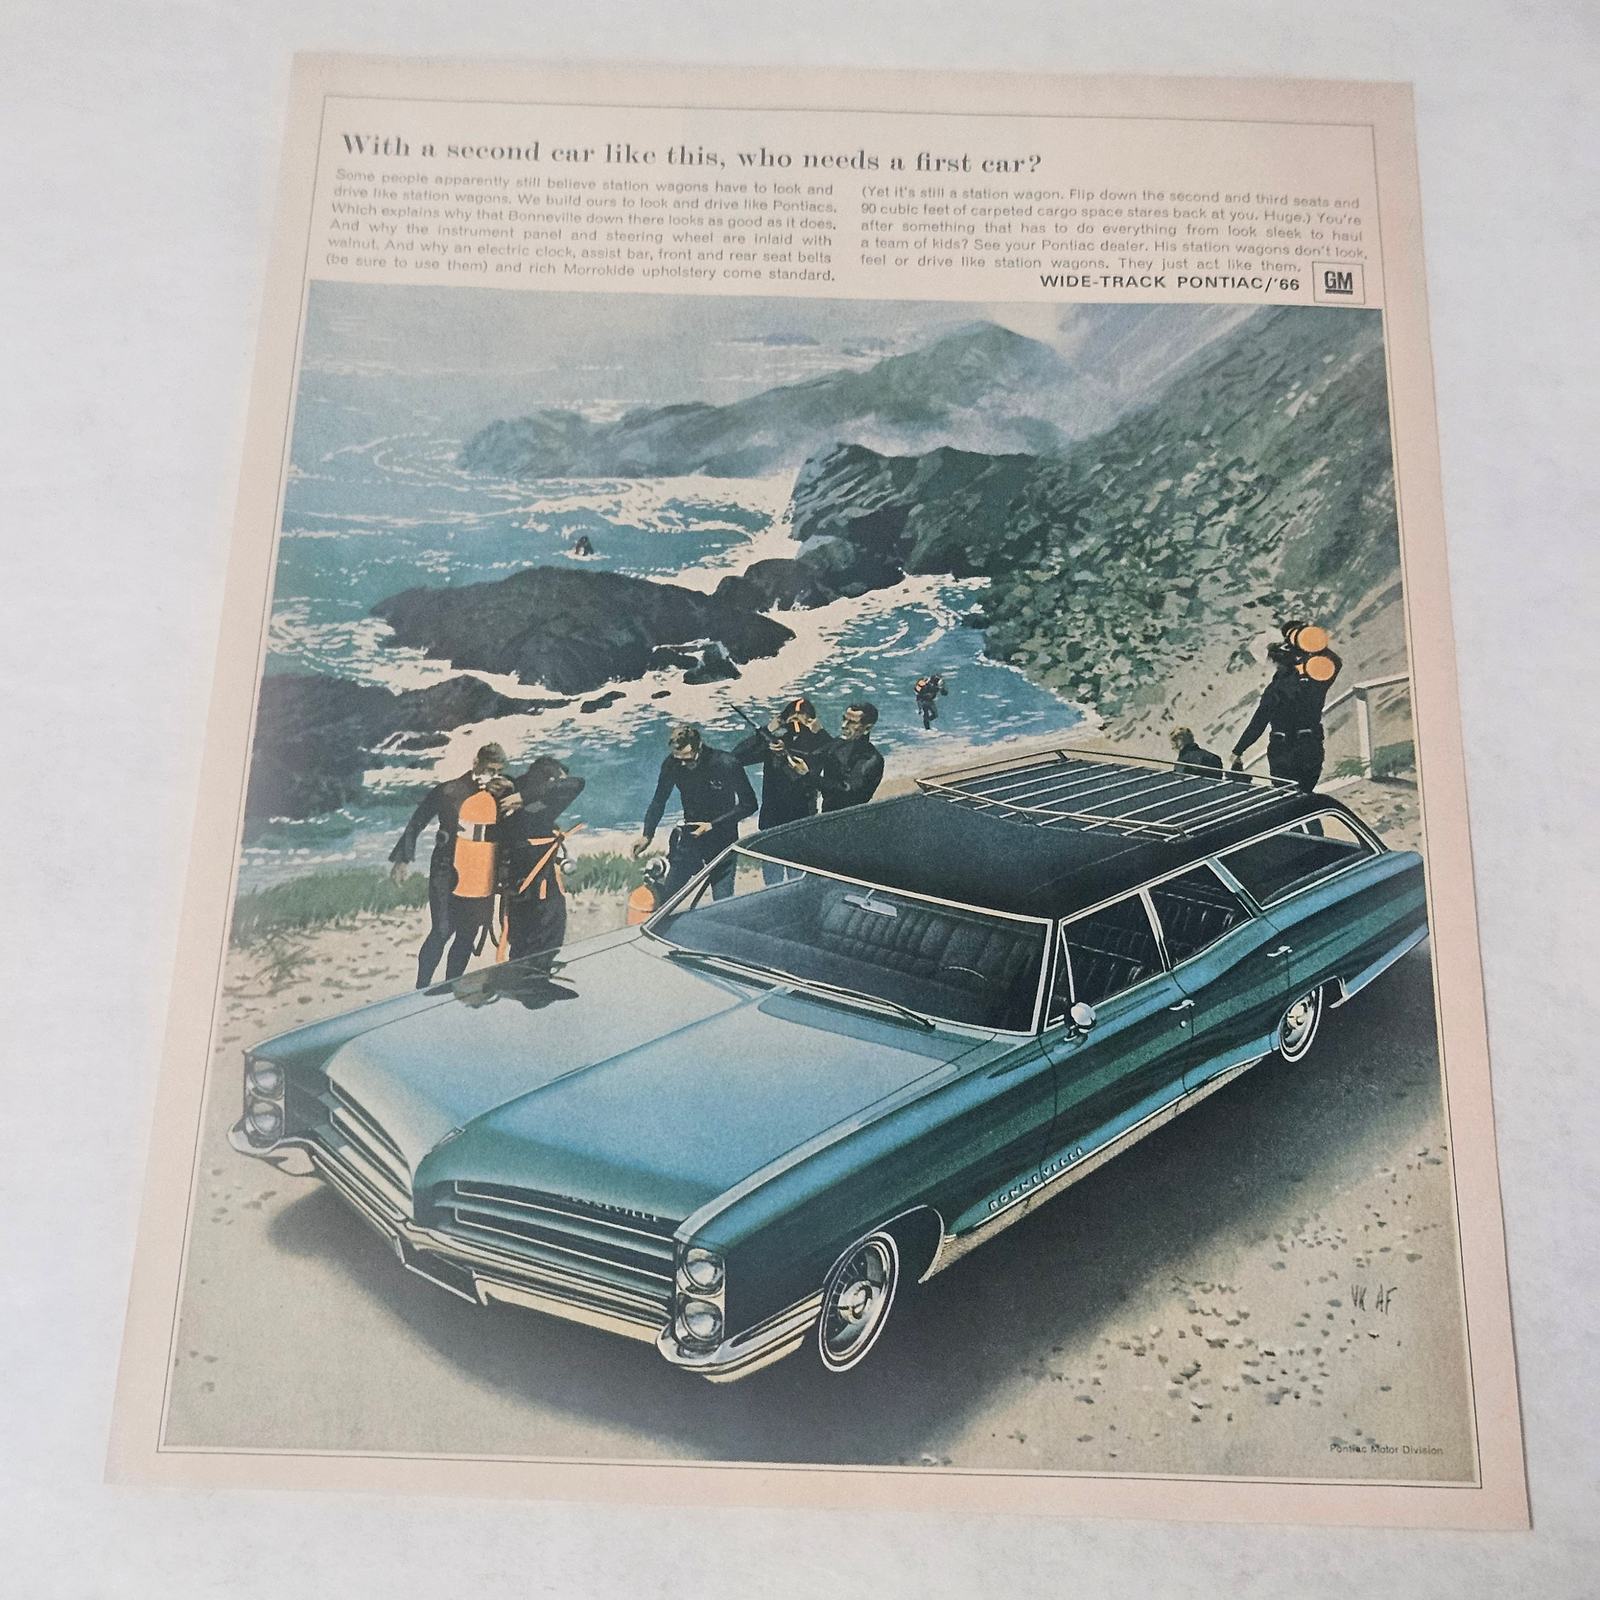 Primary image for Wide Track Pontiac Print Ad Blue Bonneville Station Wagon 1966